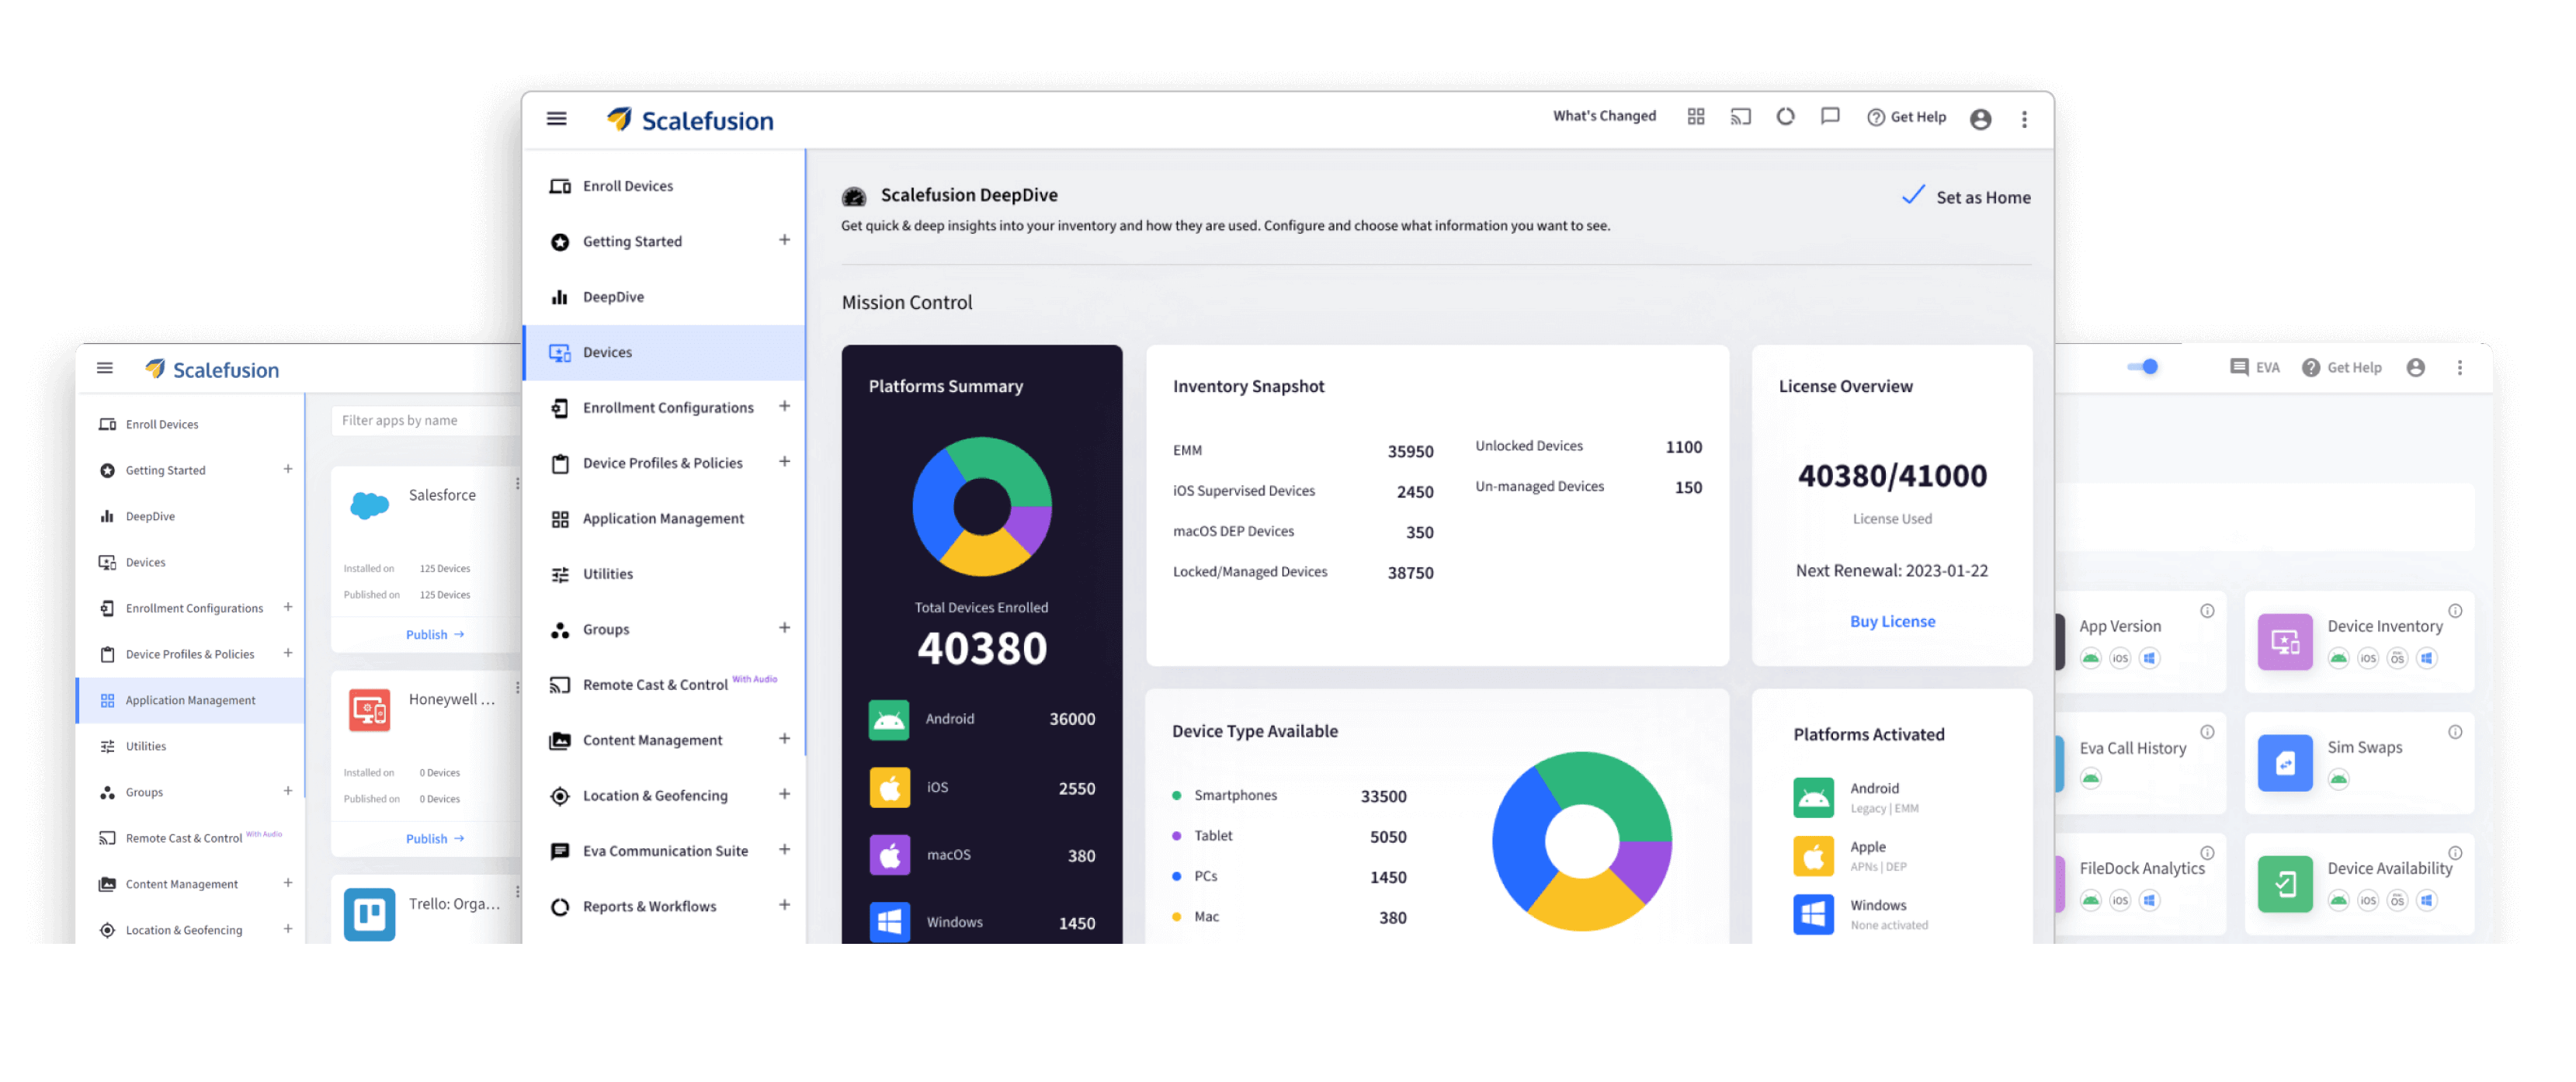 A dashboard for Scalefusion, showcasing various management and inventory metrics. Key sections include: Mission Control: Displays Platforms Summary with Total Devices Enrolled (40,380) across Android (36,000), iOS (2,550), macOS (380), and Windows (1,450). Inventory Snapshot: Provides details on EMM, iOS Supervised Devices (2,450), macOS DEP Devices (350), Locked/Managed Devices (38,750), Unlocked Devices (1,100), and Un-managed Devices (150). License Overview: Shows current license usage (40,380/41,000) and the next renewal date (2023-01-22), with an option to buy a license. Device Type Available: Breakdown of Smartphones (33,500), Tablets (5,050), PCs (1,450), and Macs (380). The sidebar menu includes options for Enroll Devices, Getting Started, DeepDive, Devices, Enrollment Configurations, Device Profiles & Policies, Application Management, Utilities, Groups, Remote Cast & Control, Content Management, Location & Geofencing, Eva Communication Suite, and Reports & Workflows. The top bar provides navigation for What's Changed, Get Help, and more.